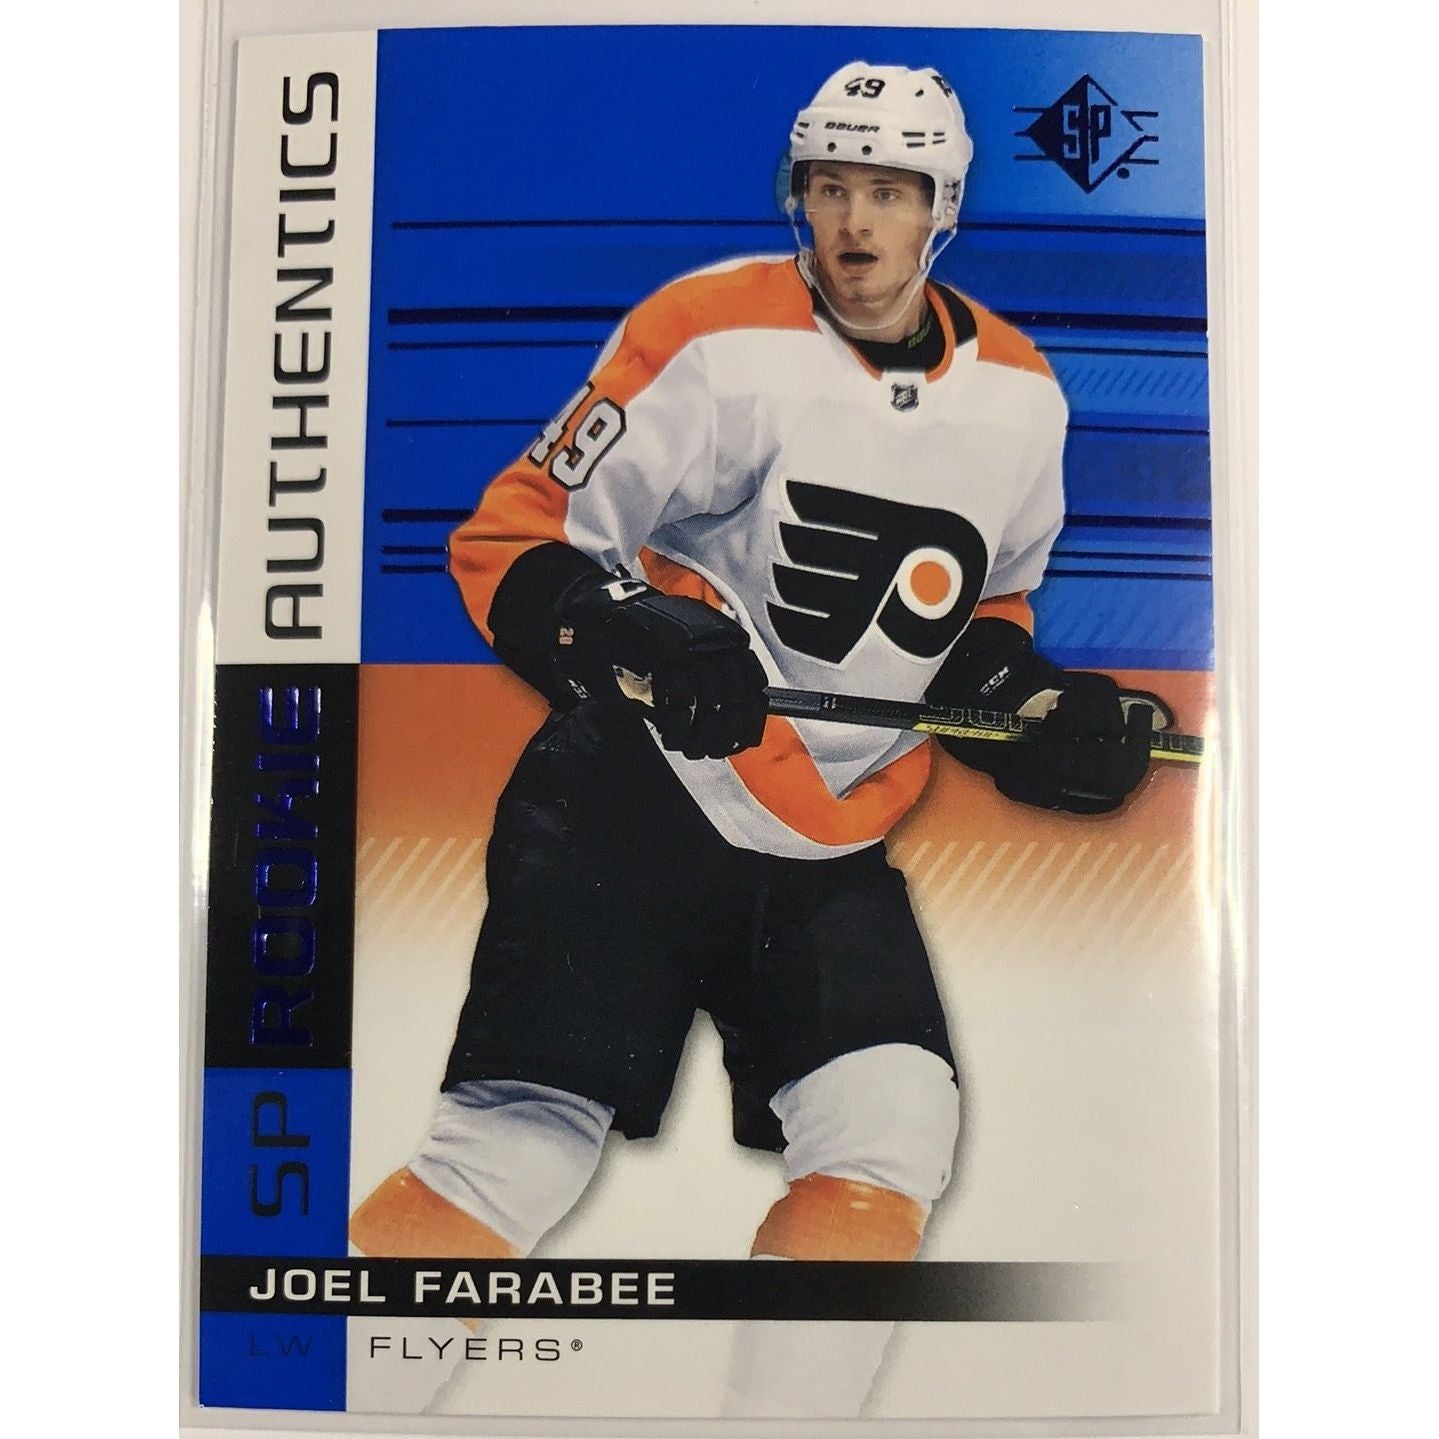  2019-20 SP Joel Farabee Rookie Authentics  Local Legends Cards & Collectibles